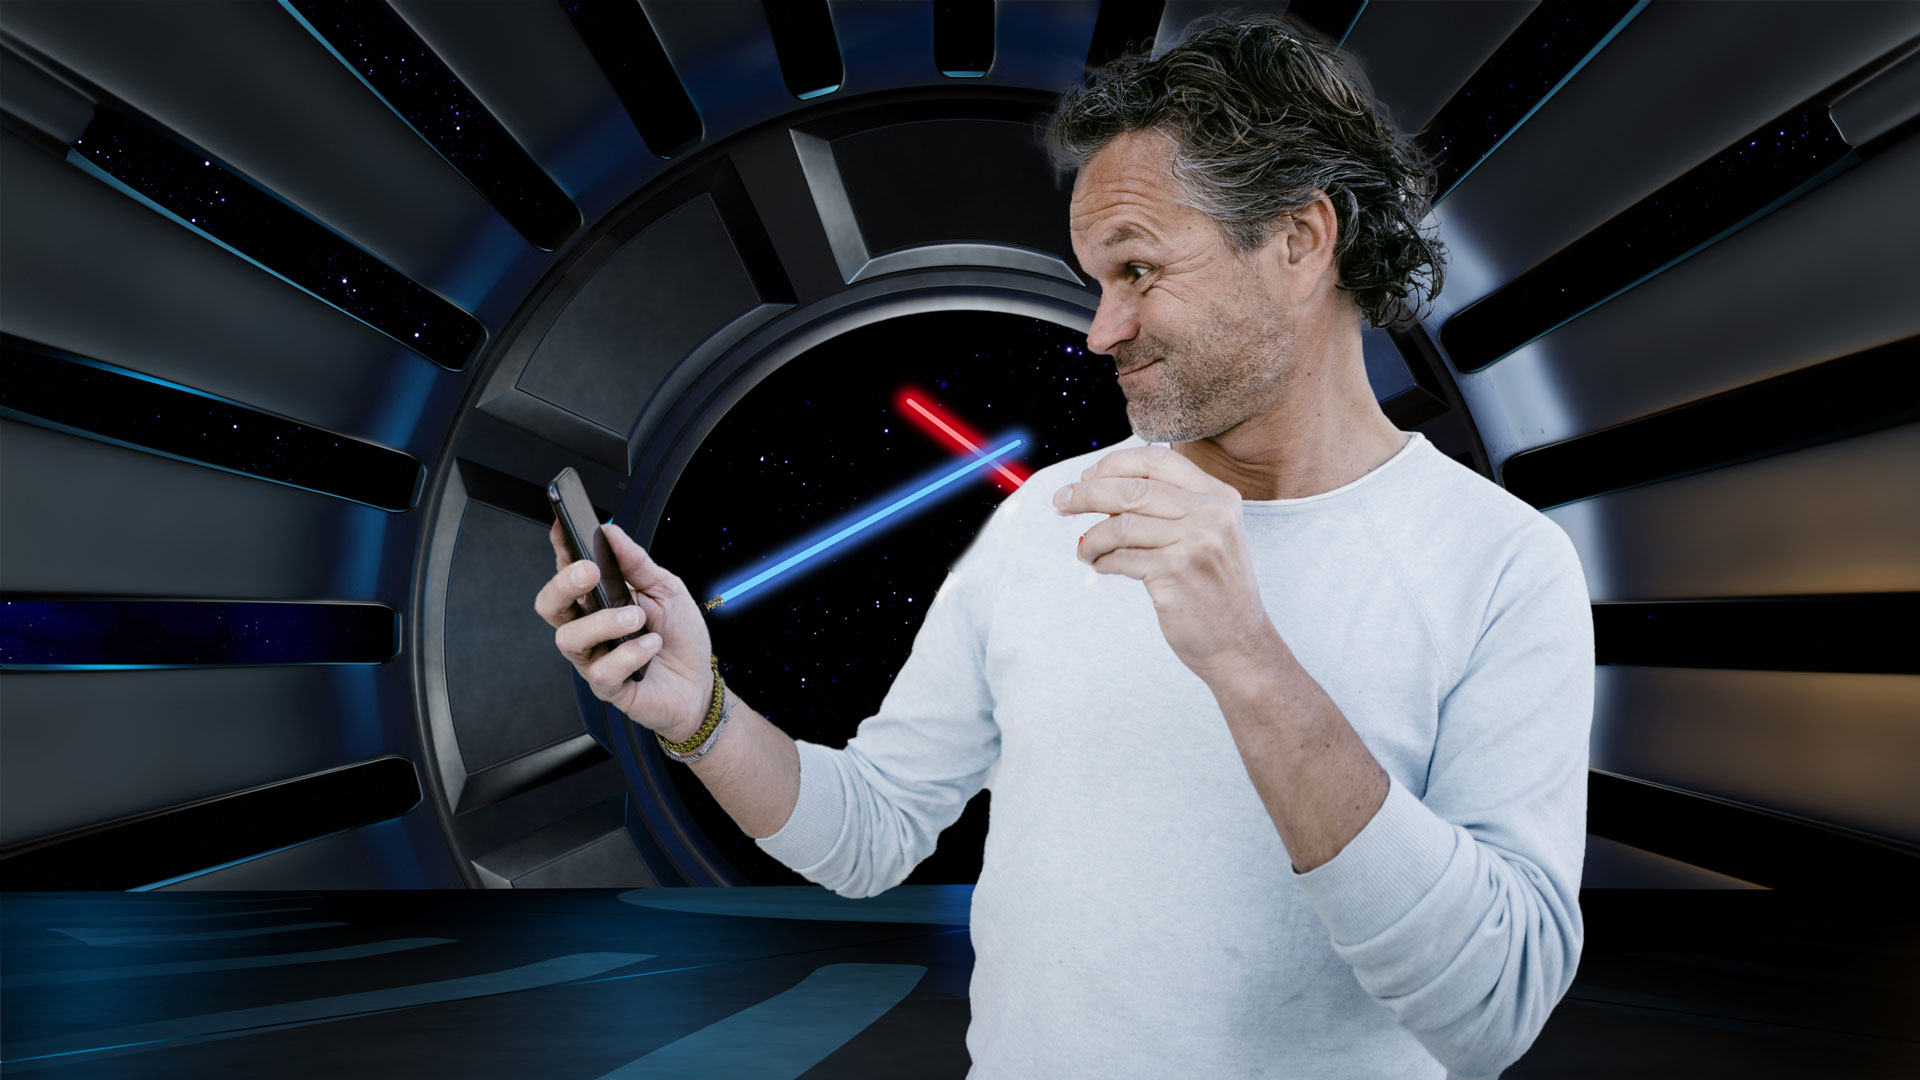 I made a Star Wars-inspired iPhone ringtone - you can, too | TechRadar